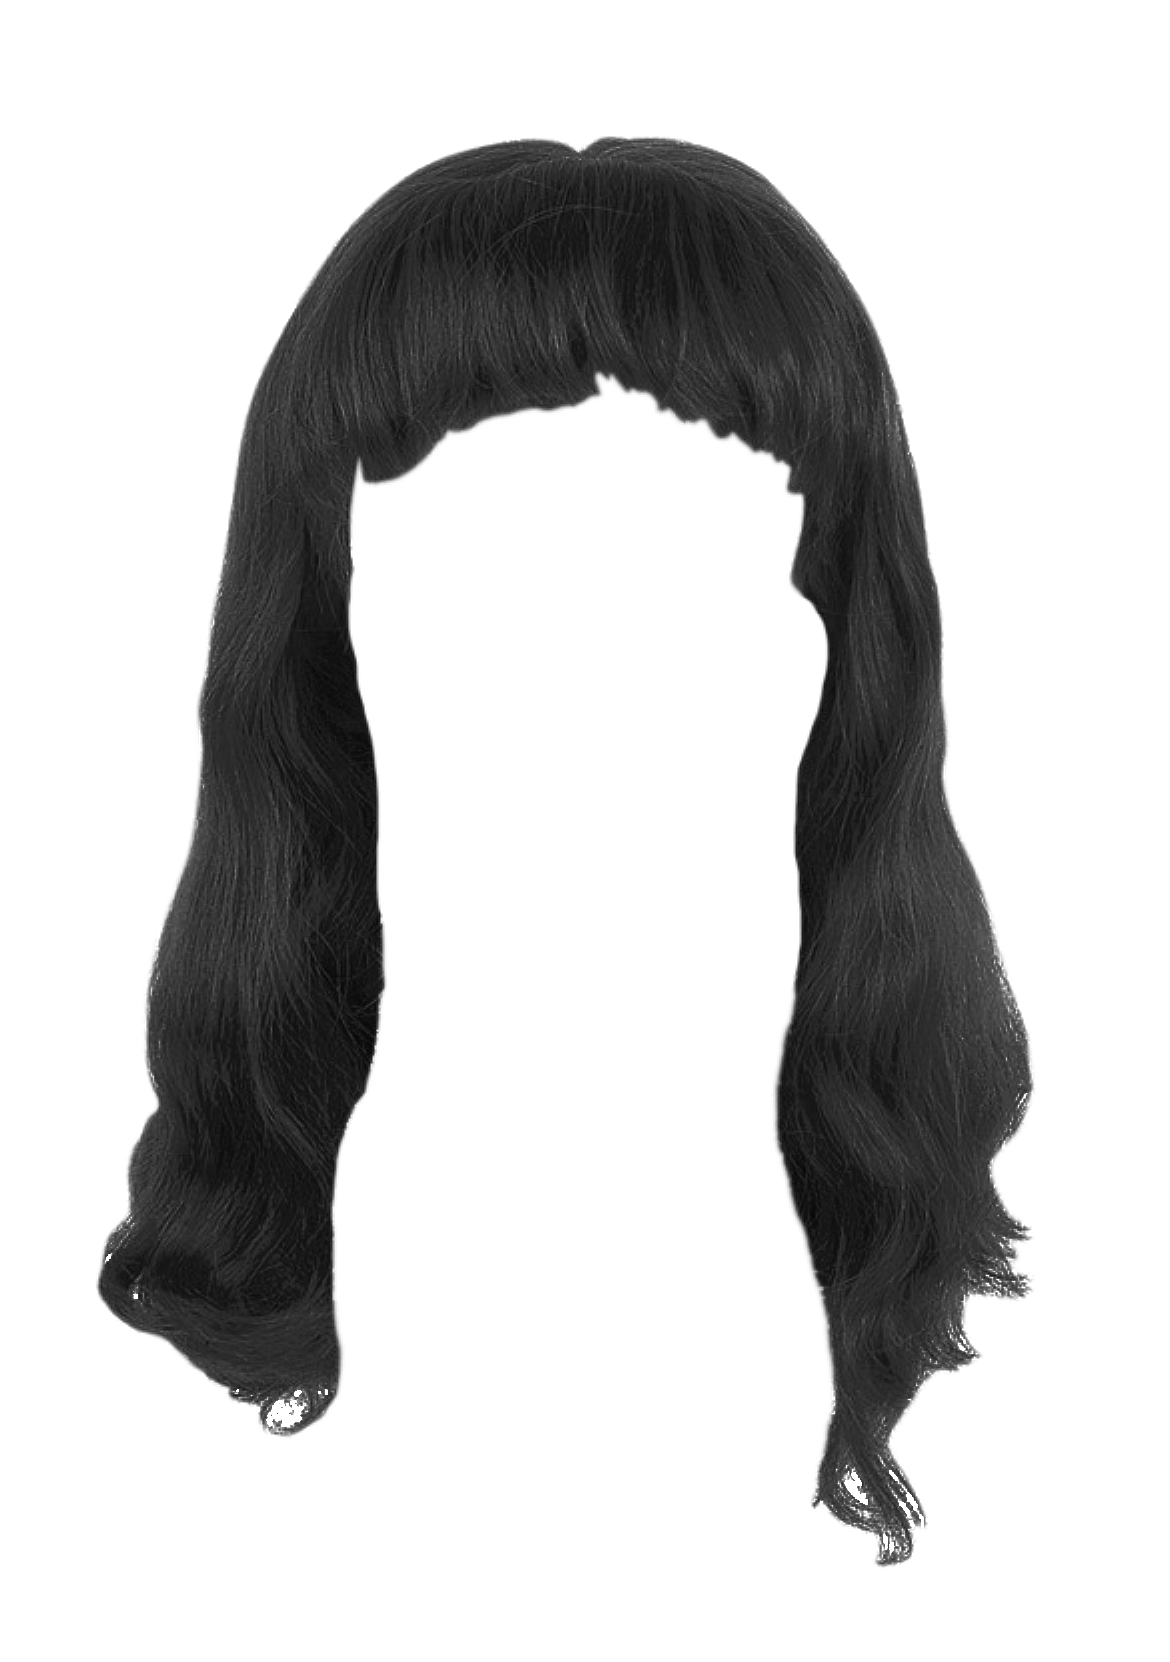 Girl Hair Png Transparent Best Hairstyles Ideas For Women And Men In